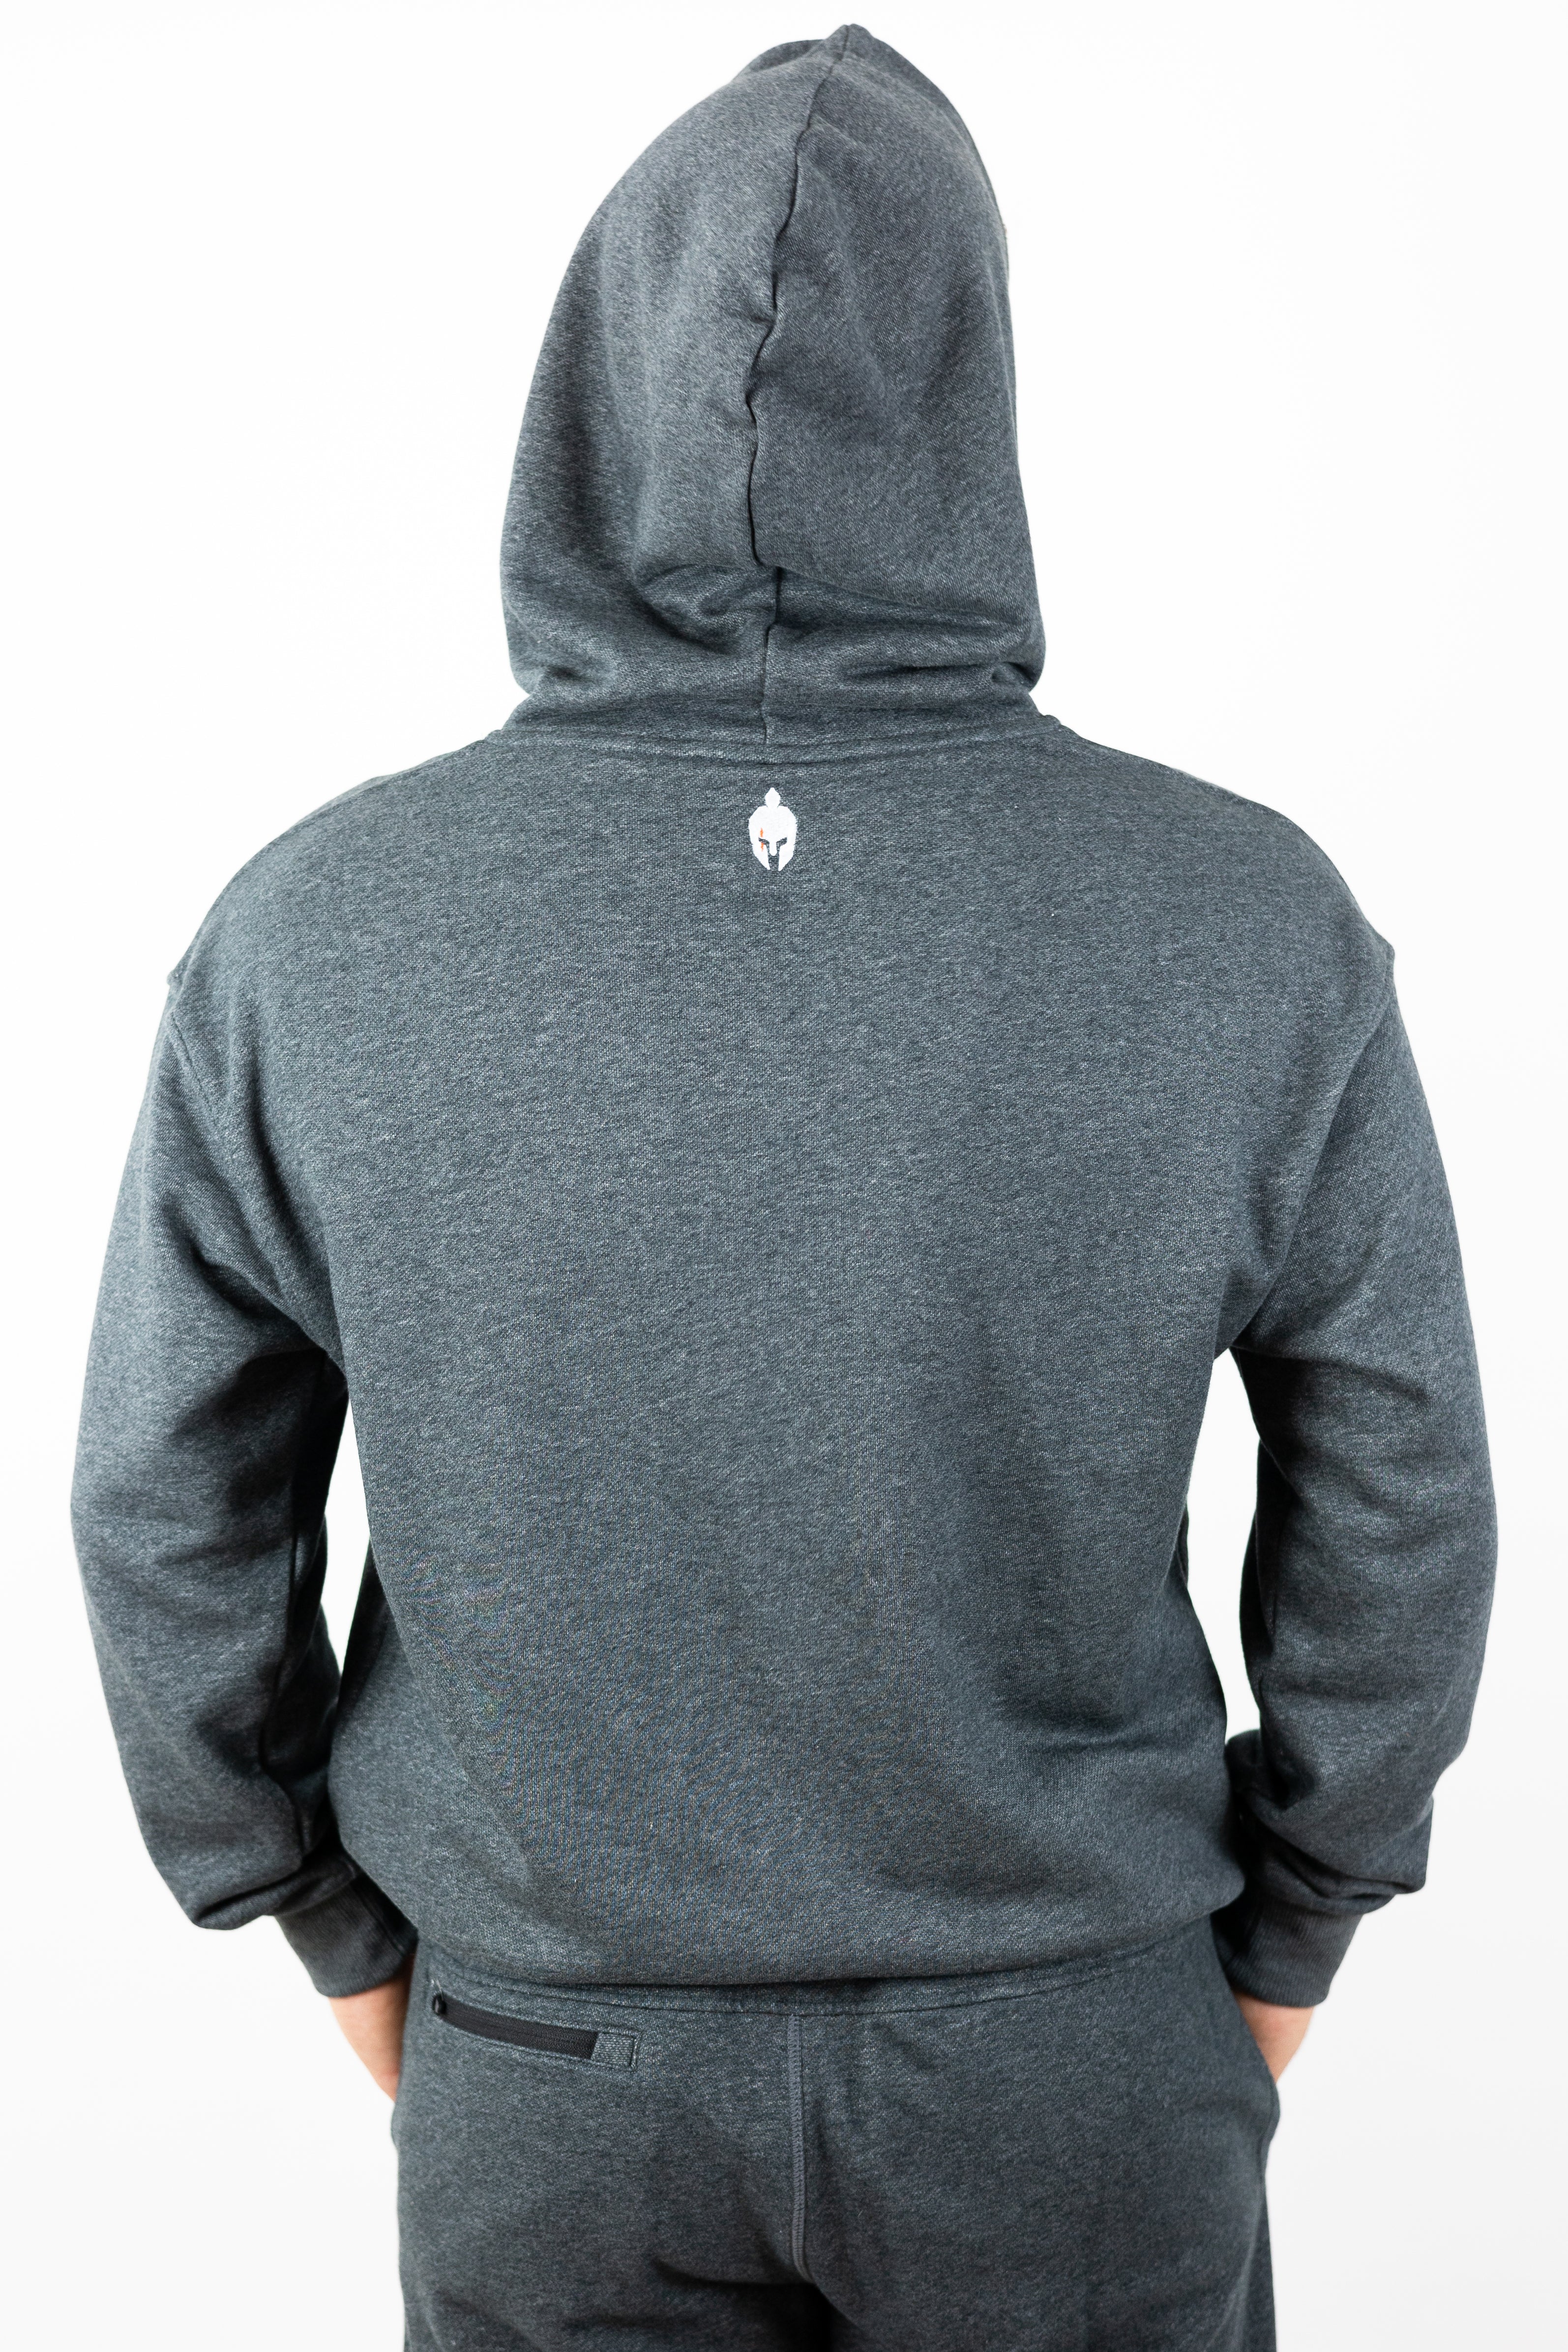 Man wearing gray hoodie with hood up and small helmet logo embroidered below hood neckline